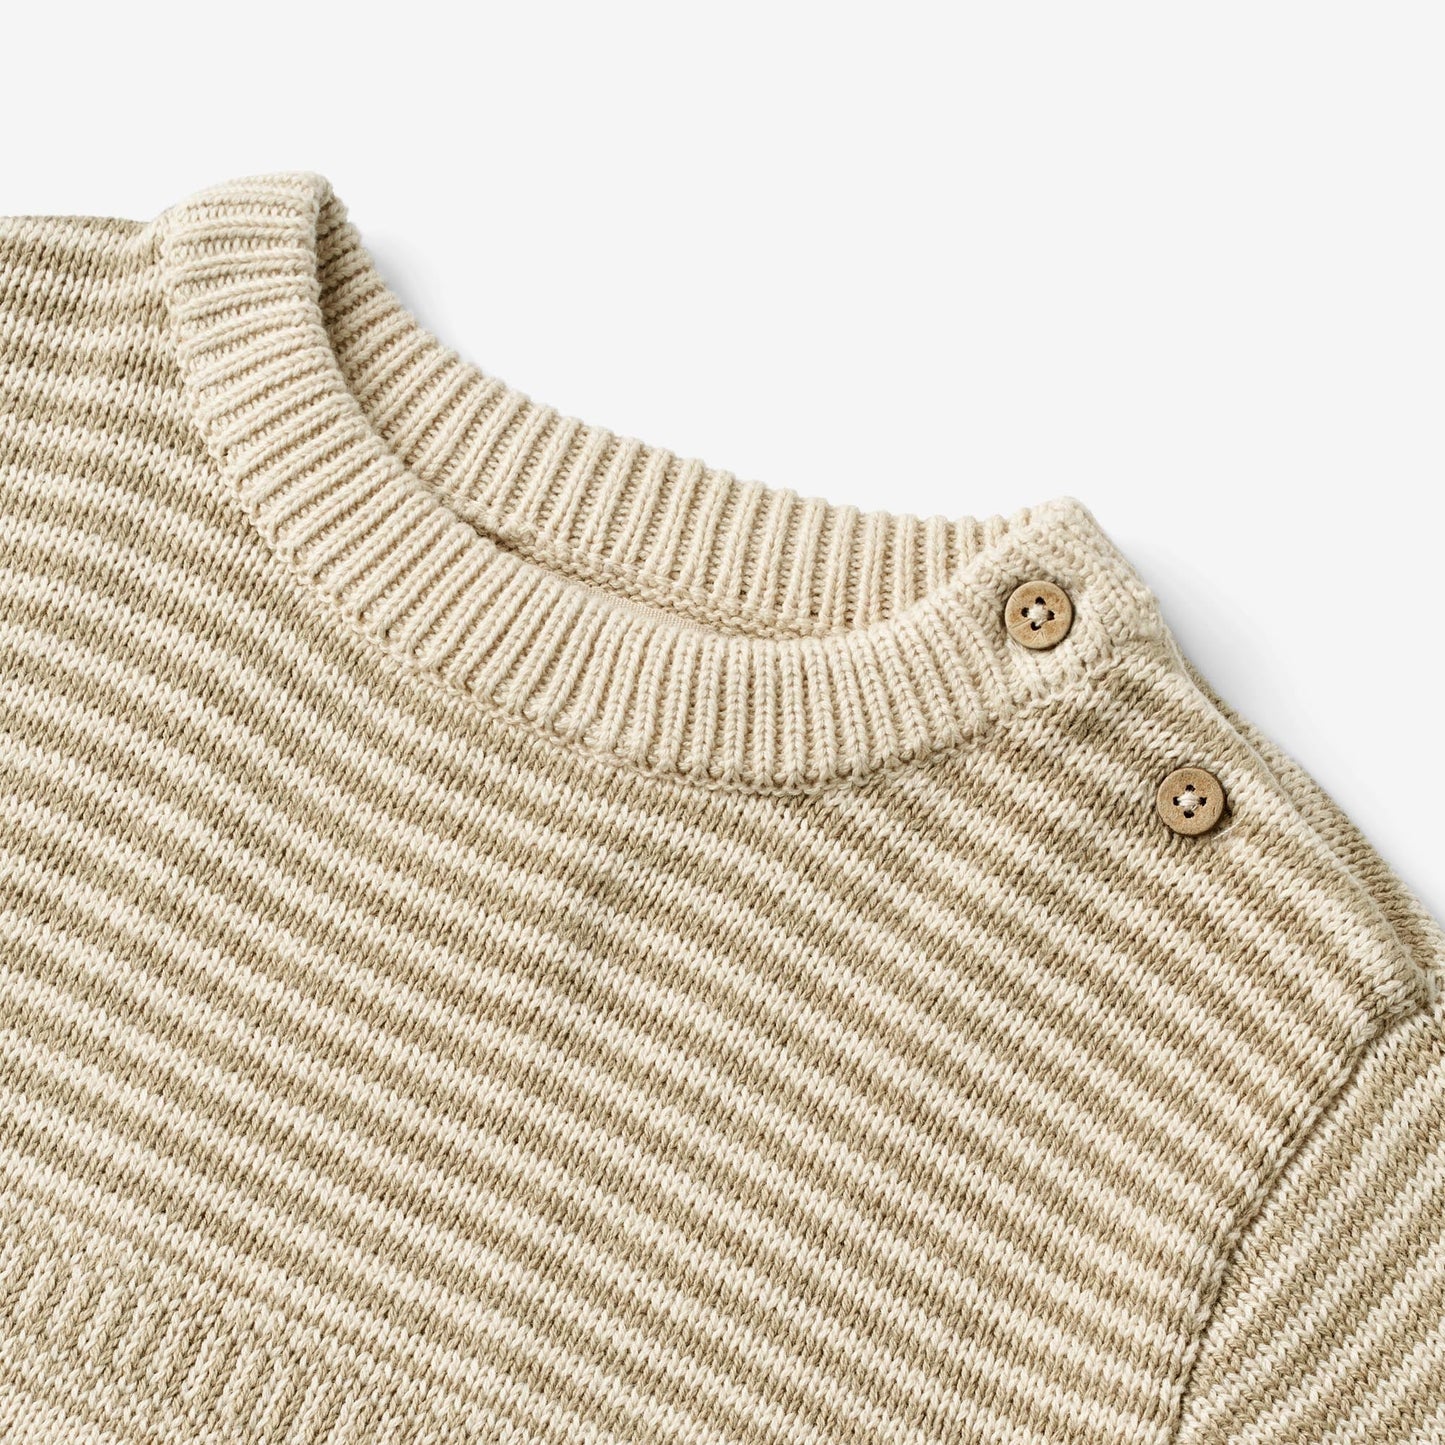 Knit Pullover Janus - Grey Sand - Knitted Tops - ELLIE